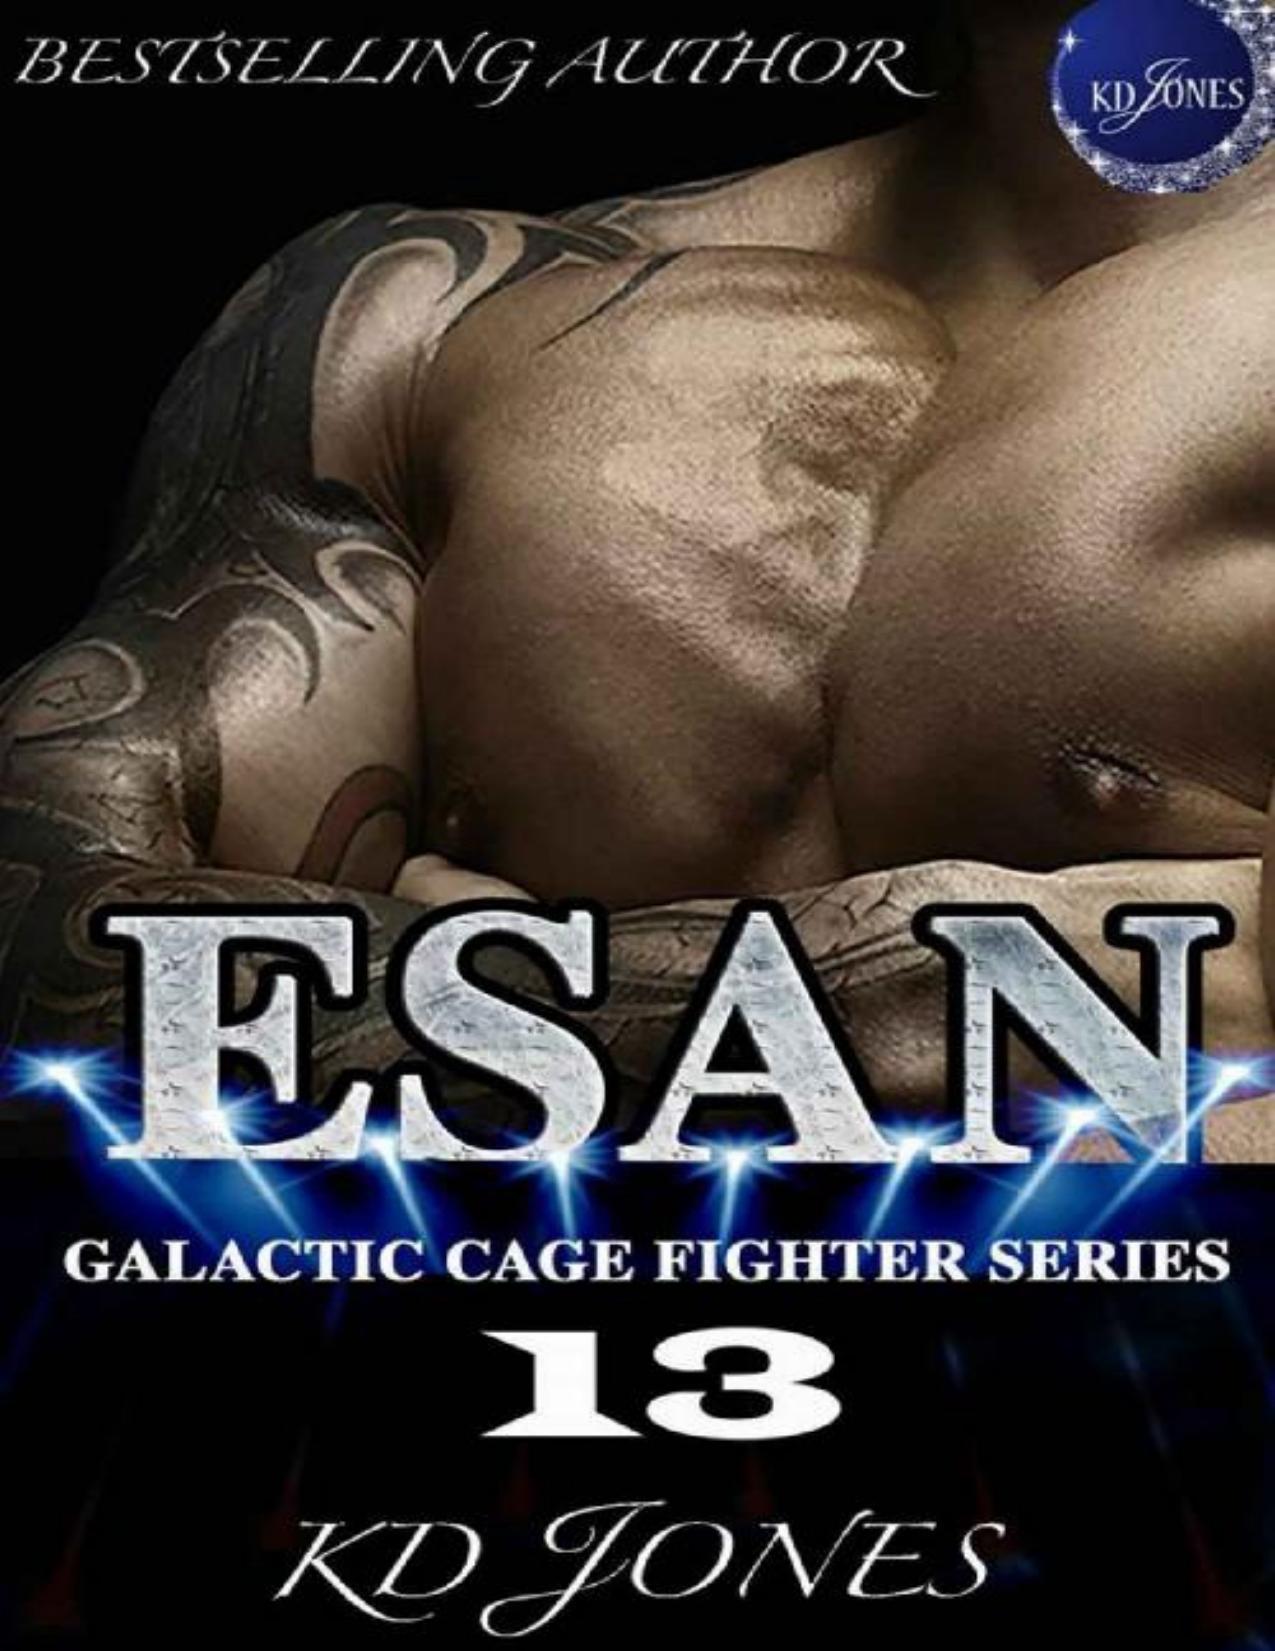 ESAN (Galactic Cage Fighter Series Book 13)